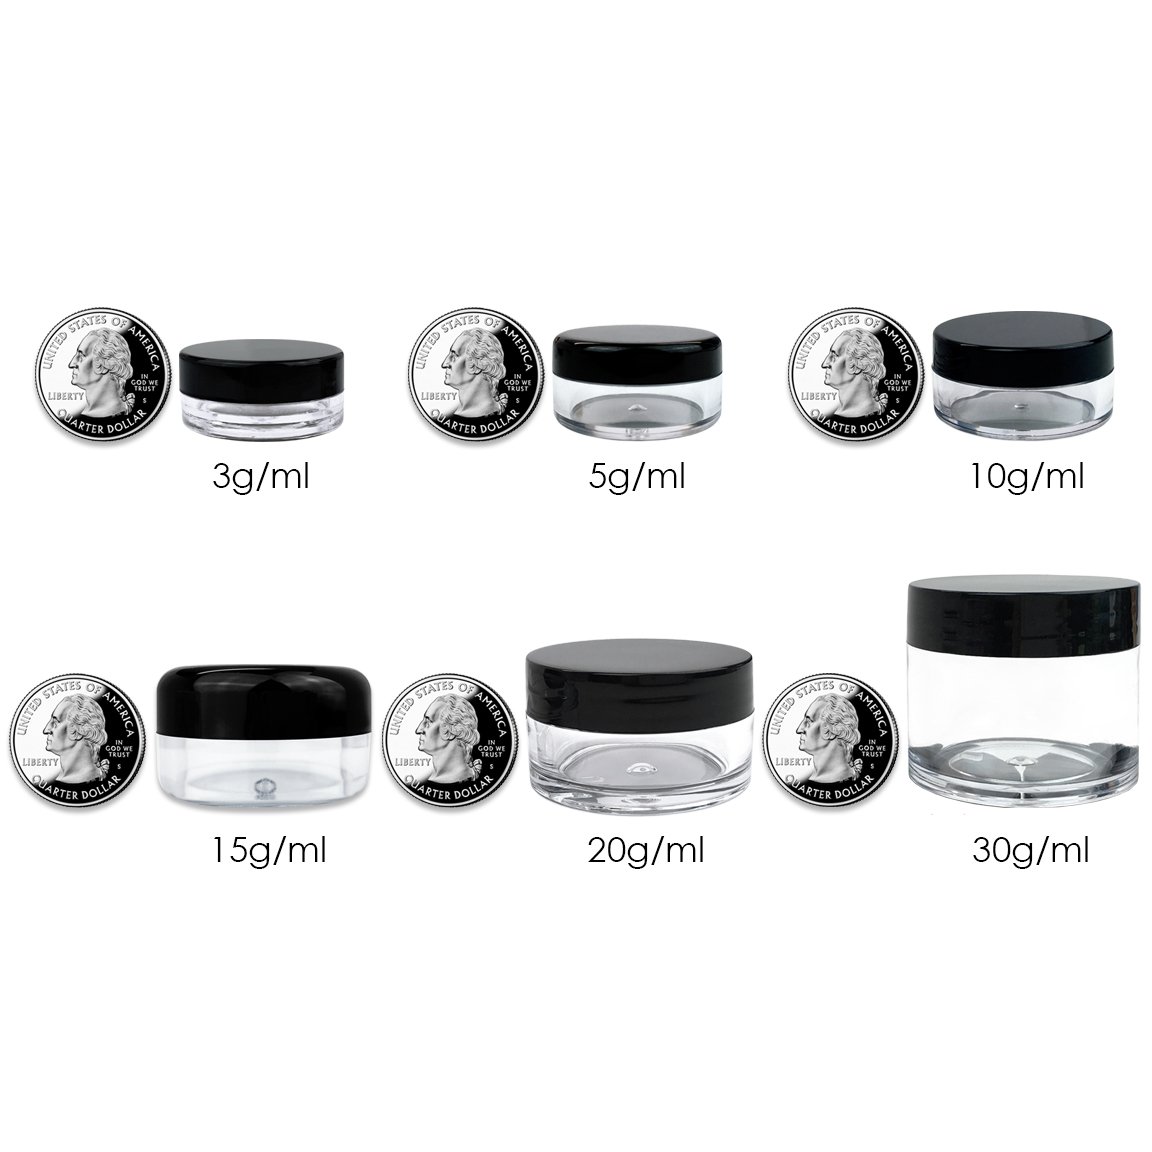 Beauticom 10g/10ml (0.35 Fl Oz) Round Clear Jars with Round Top Lids for Creams, Lotions, Make Up, Powders, Glitters, and more... (Color: Clear Lid, Quantity: 40 Pieces)